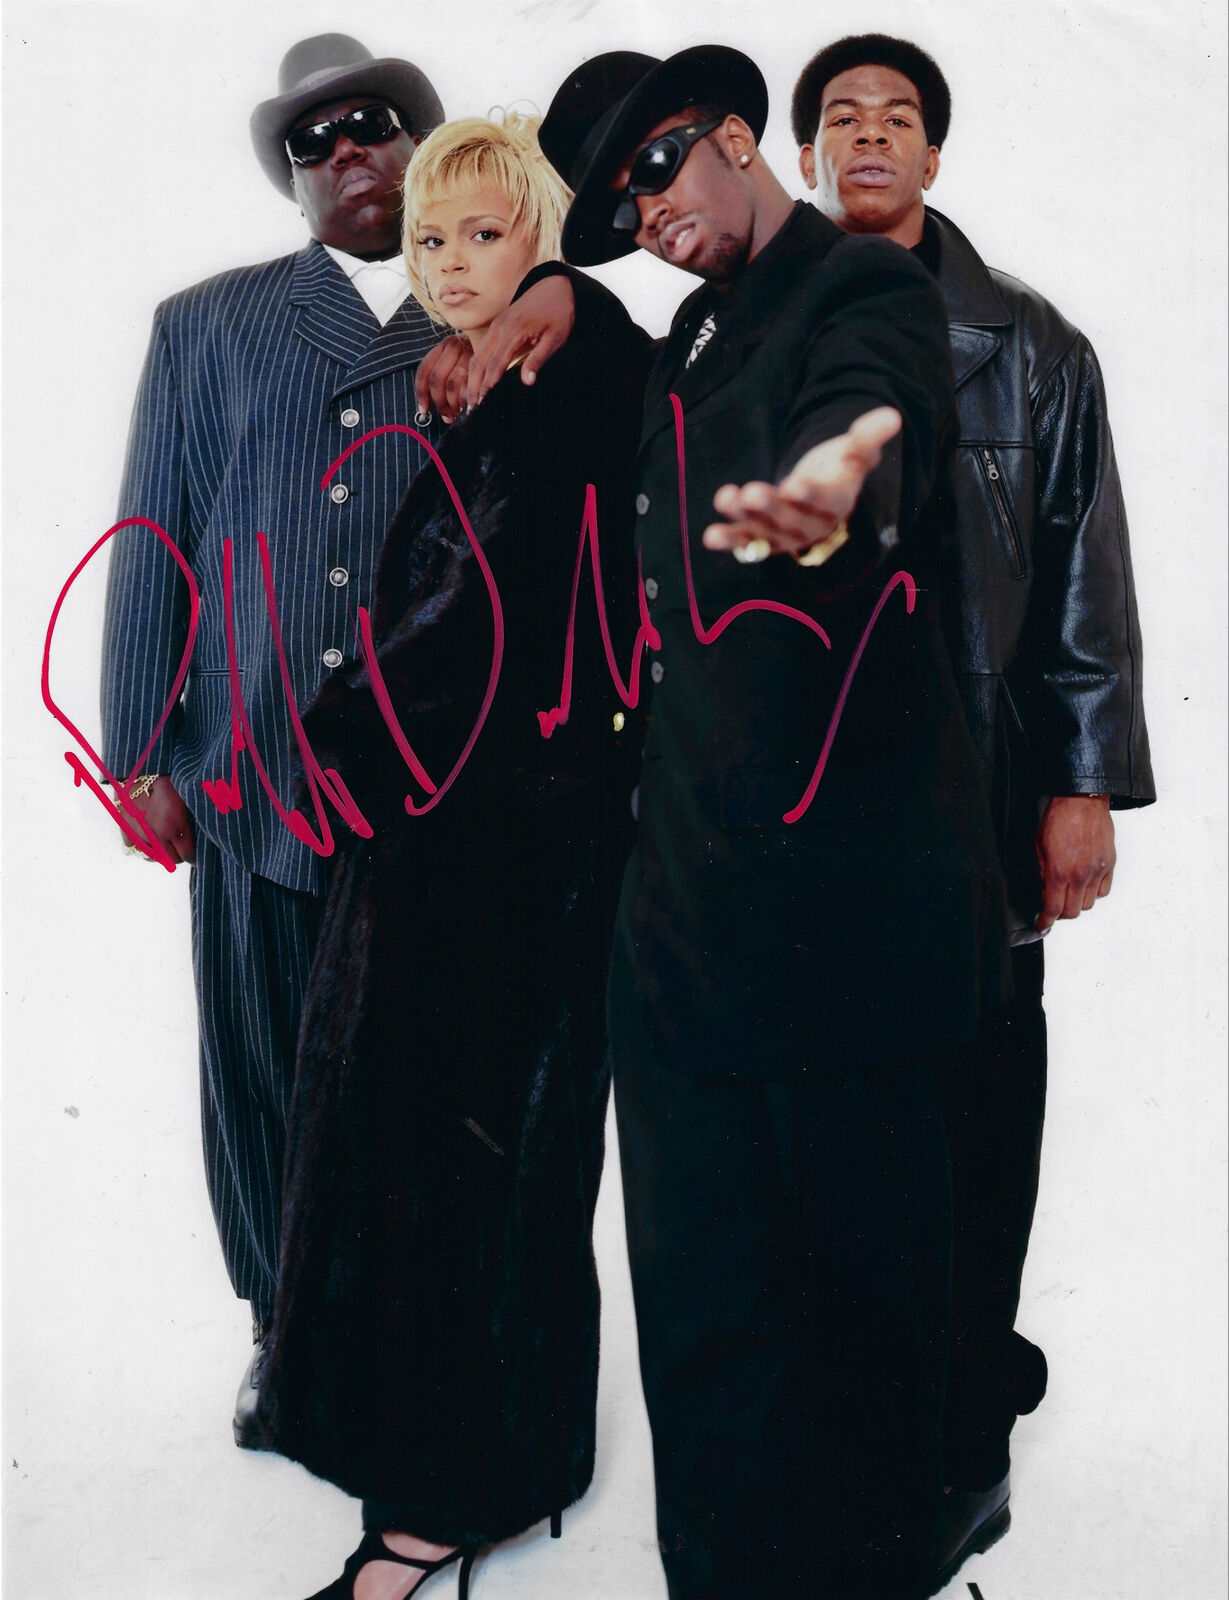 P DIDDY SEAN COMBS SIGNED 14x11 PHOTO BAD BOY NOTORIOUS BIG 2 (AFTAL COA)